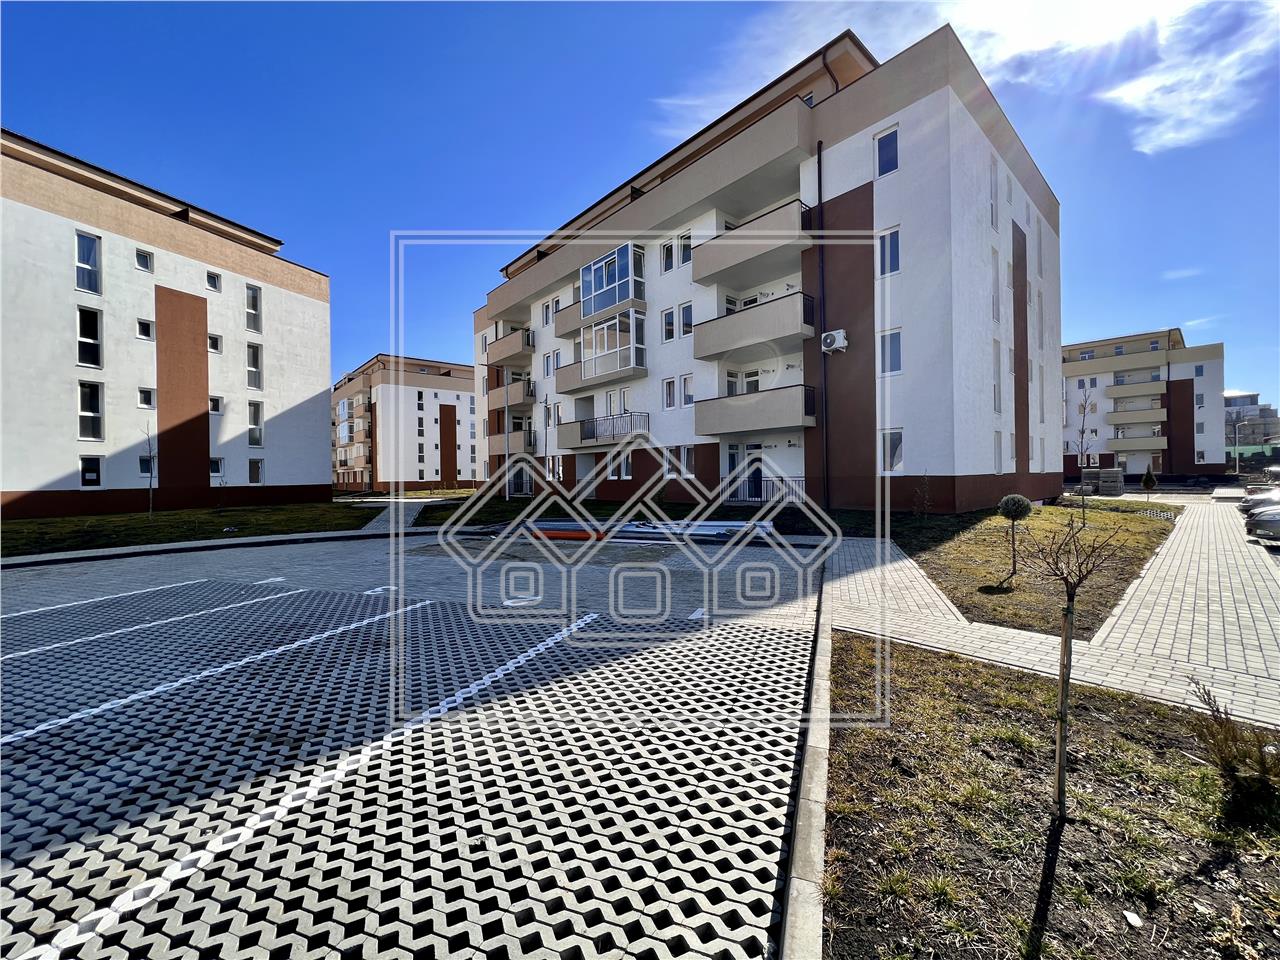 apartment For sale with 1 room - with 2 balconies - intermediate floor